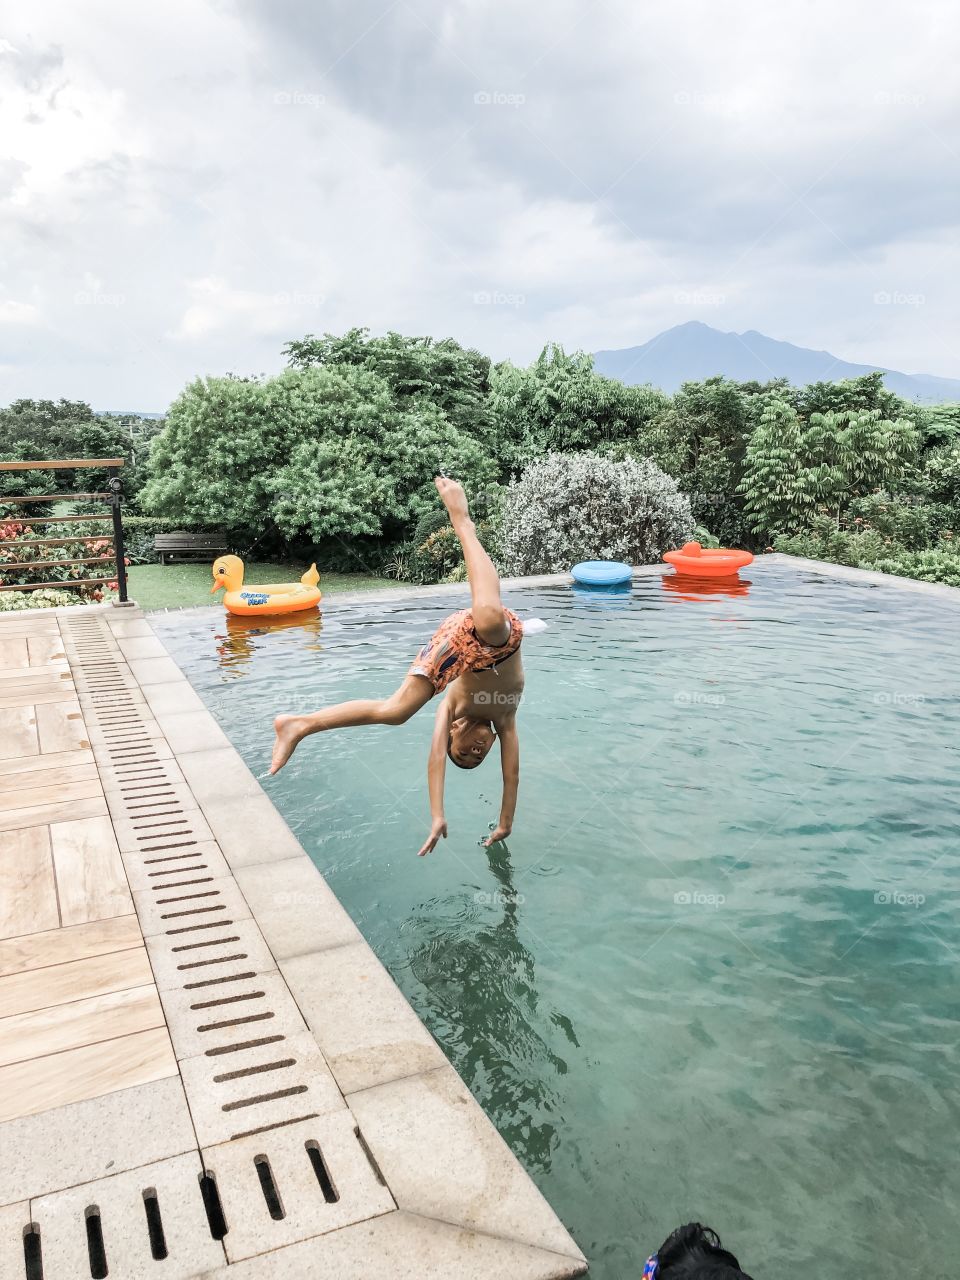 Boy doing somersault into outdoor pool with mountain in the background